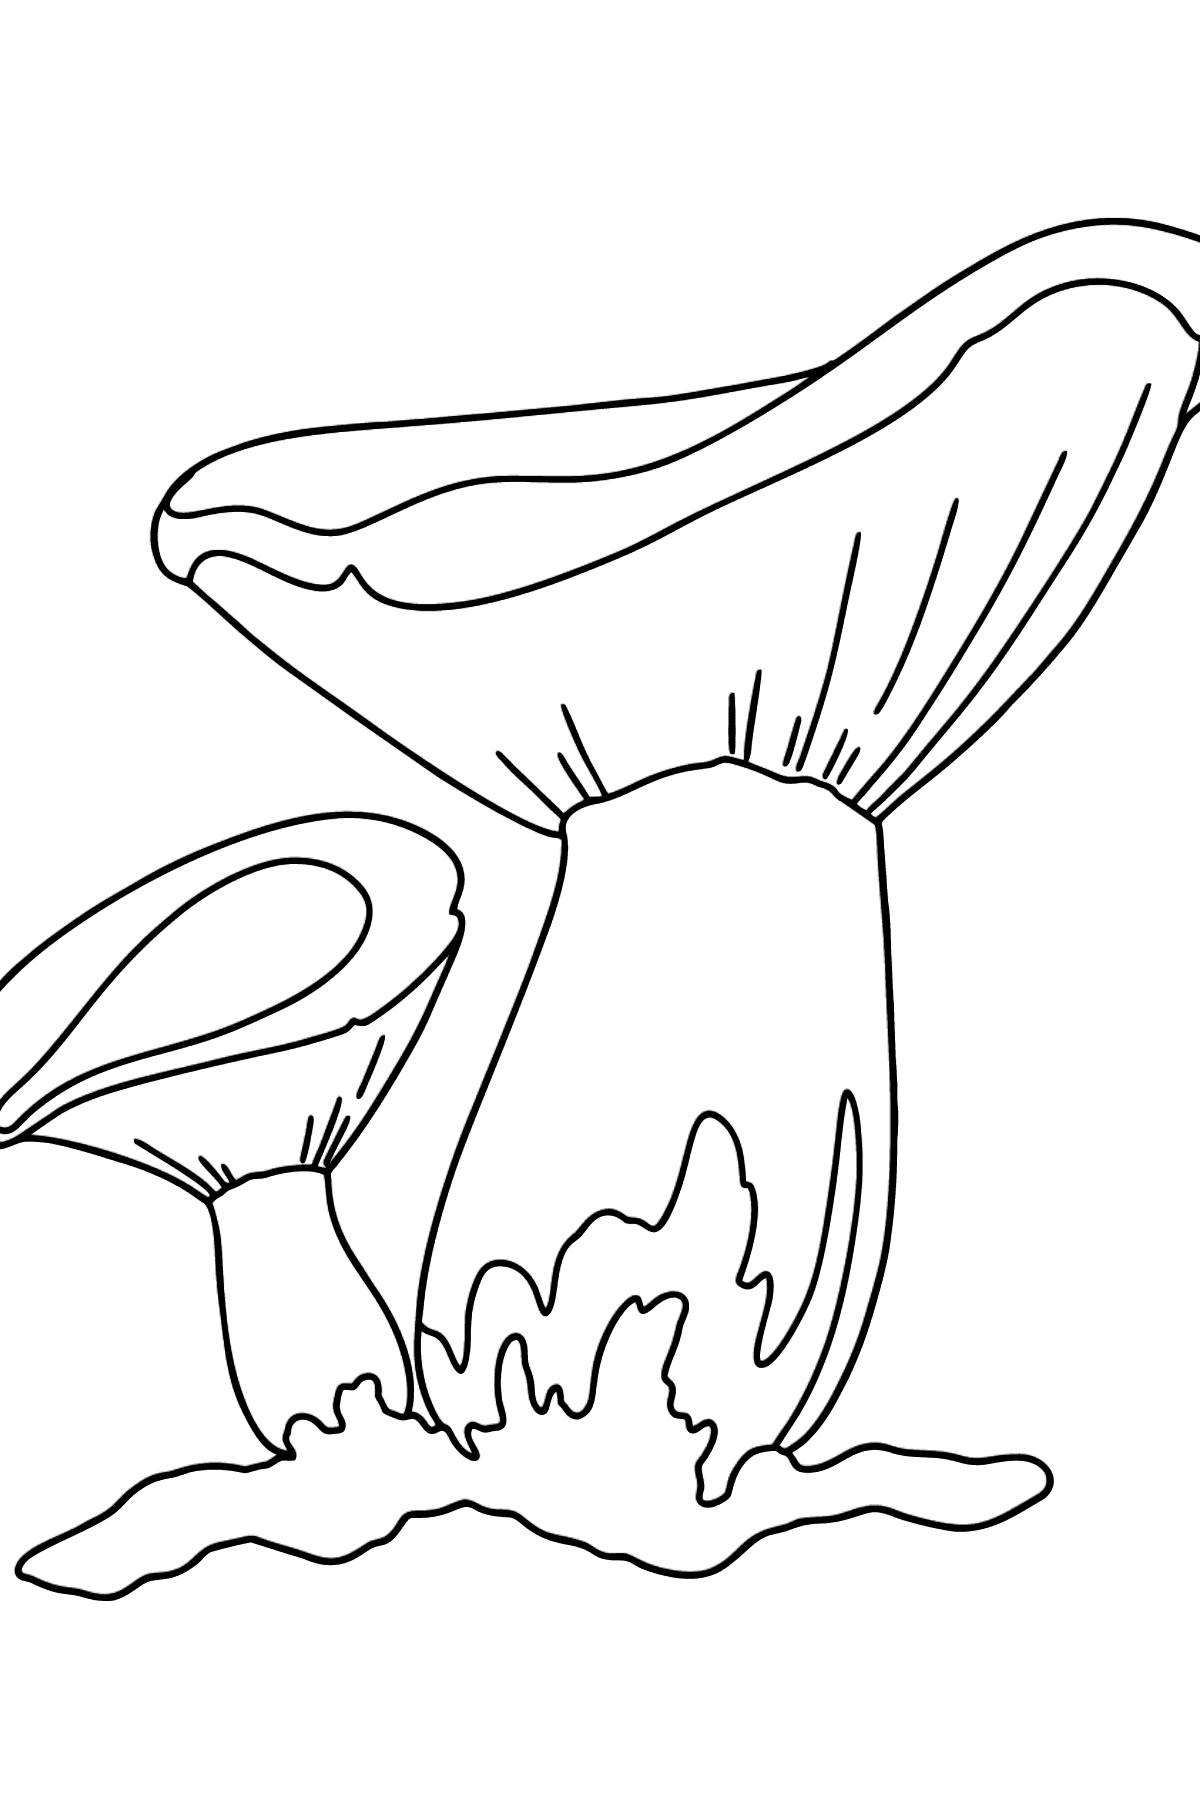 Russula coloring page - Coloring Pages for Kids